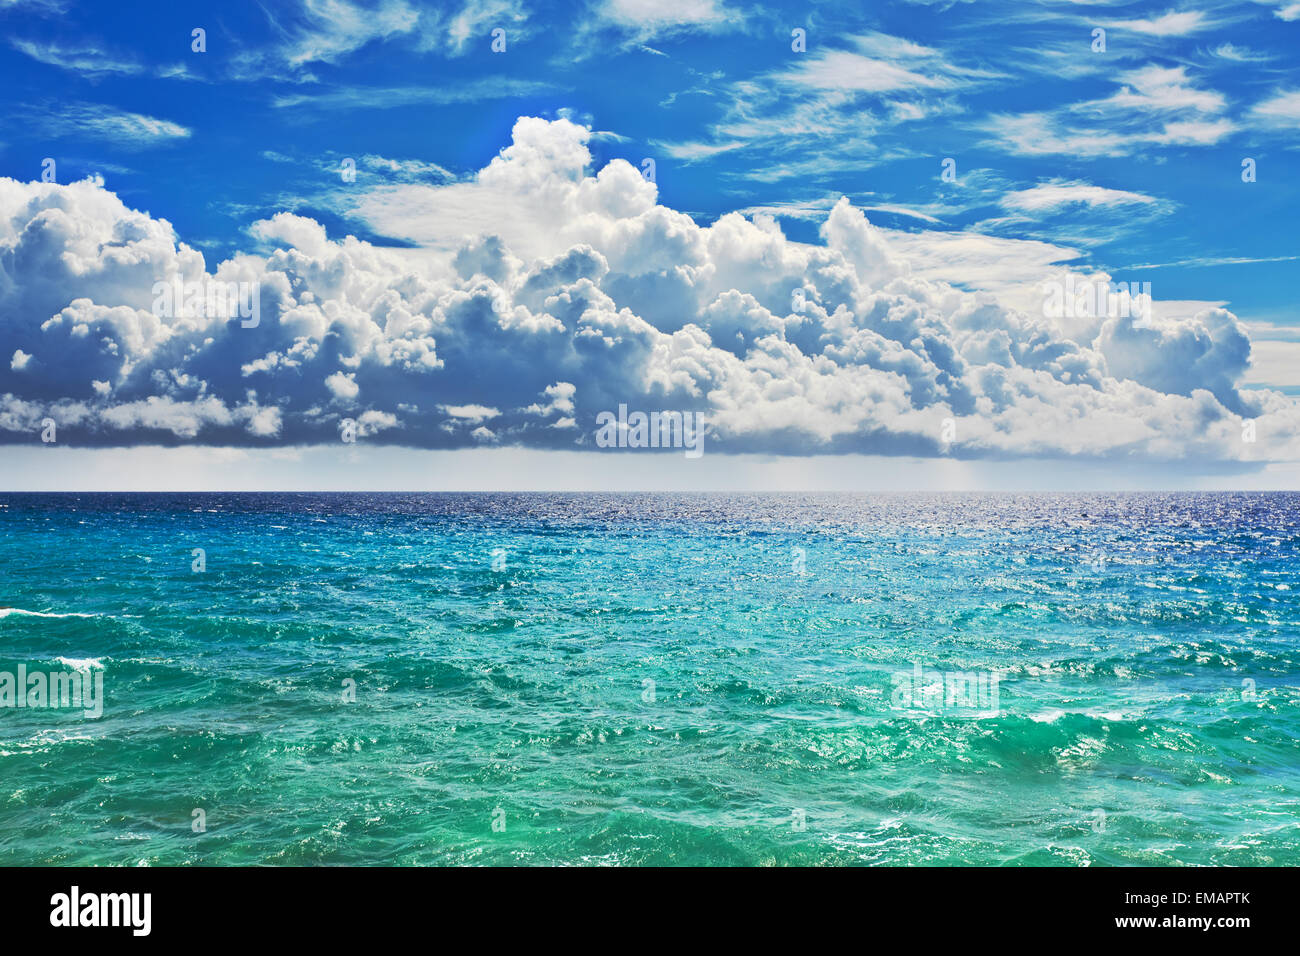 Beautiful view of the clouds over the sea Stock Photo